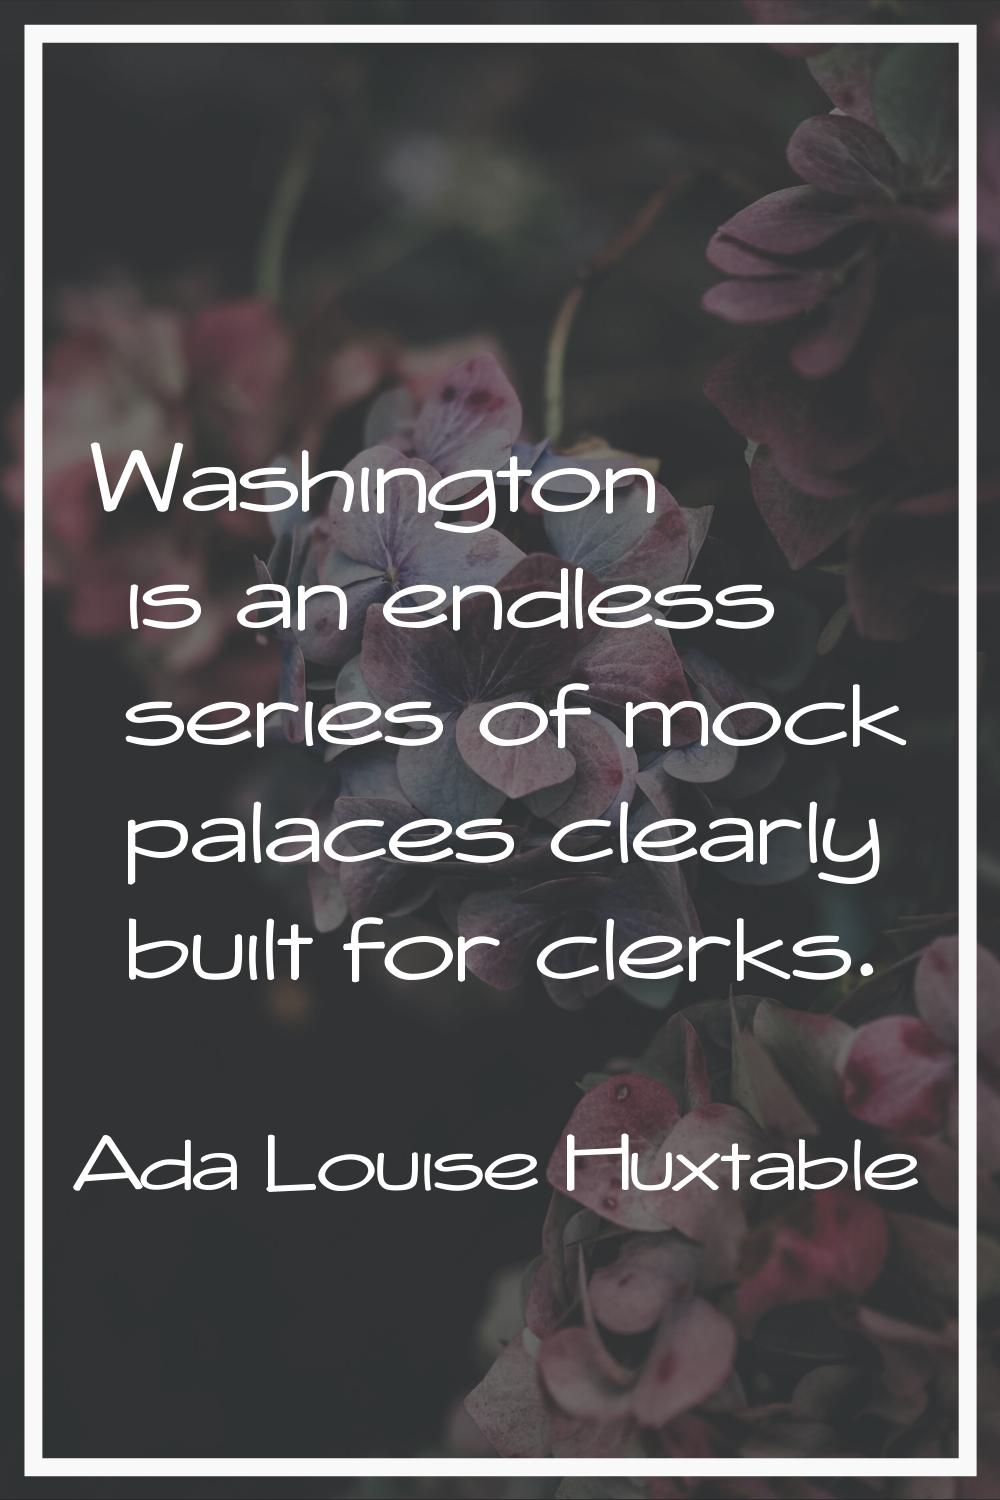 Washington is an endless series of mock palaces clearly built for clerks.